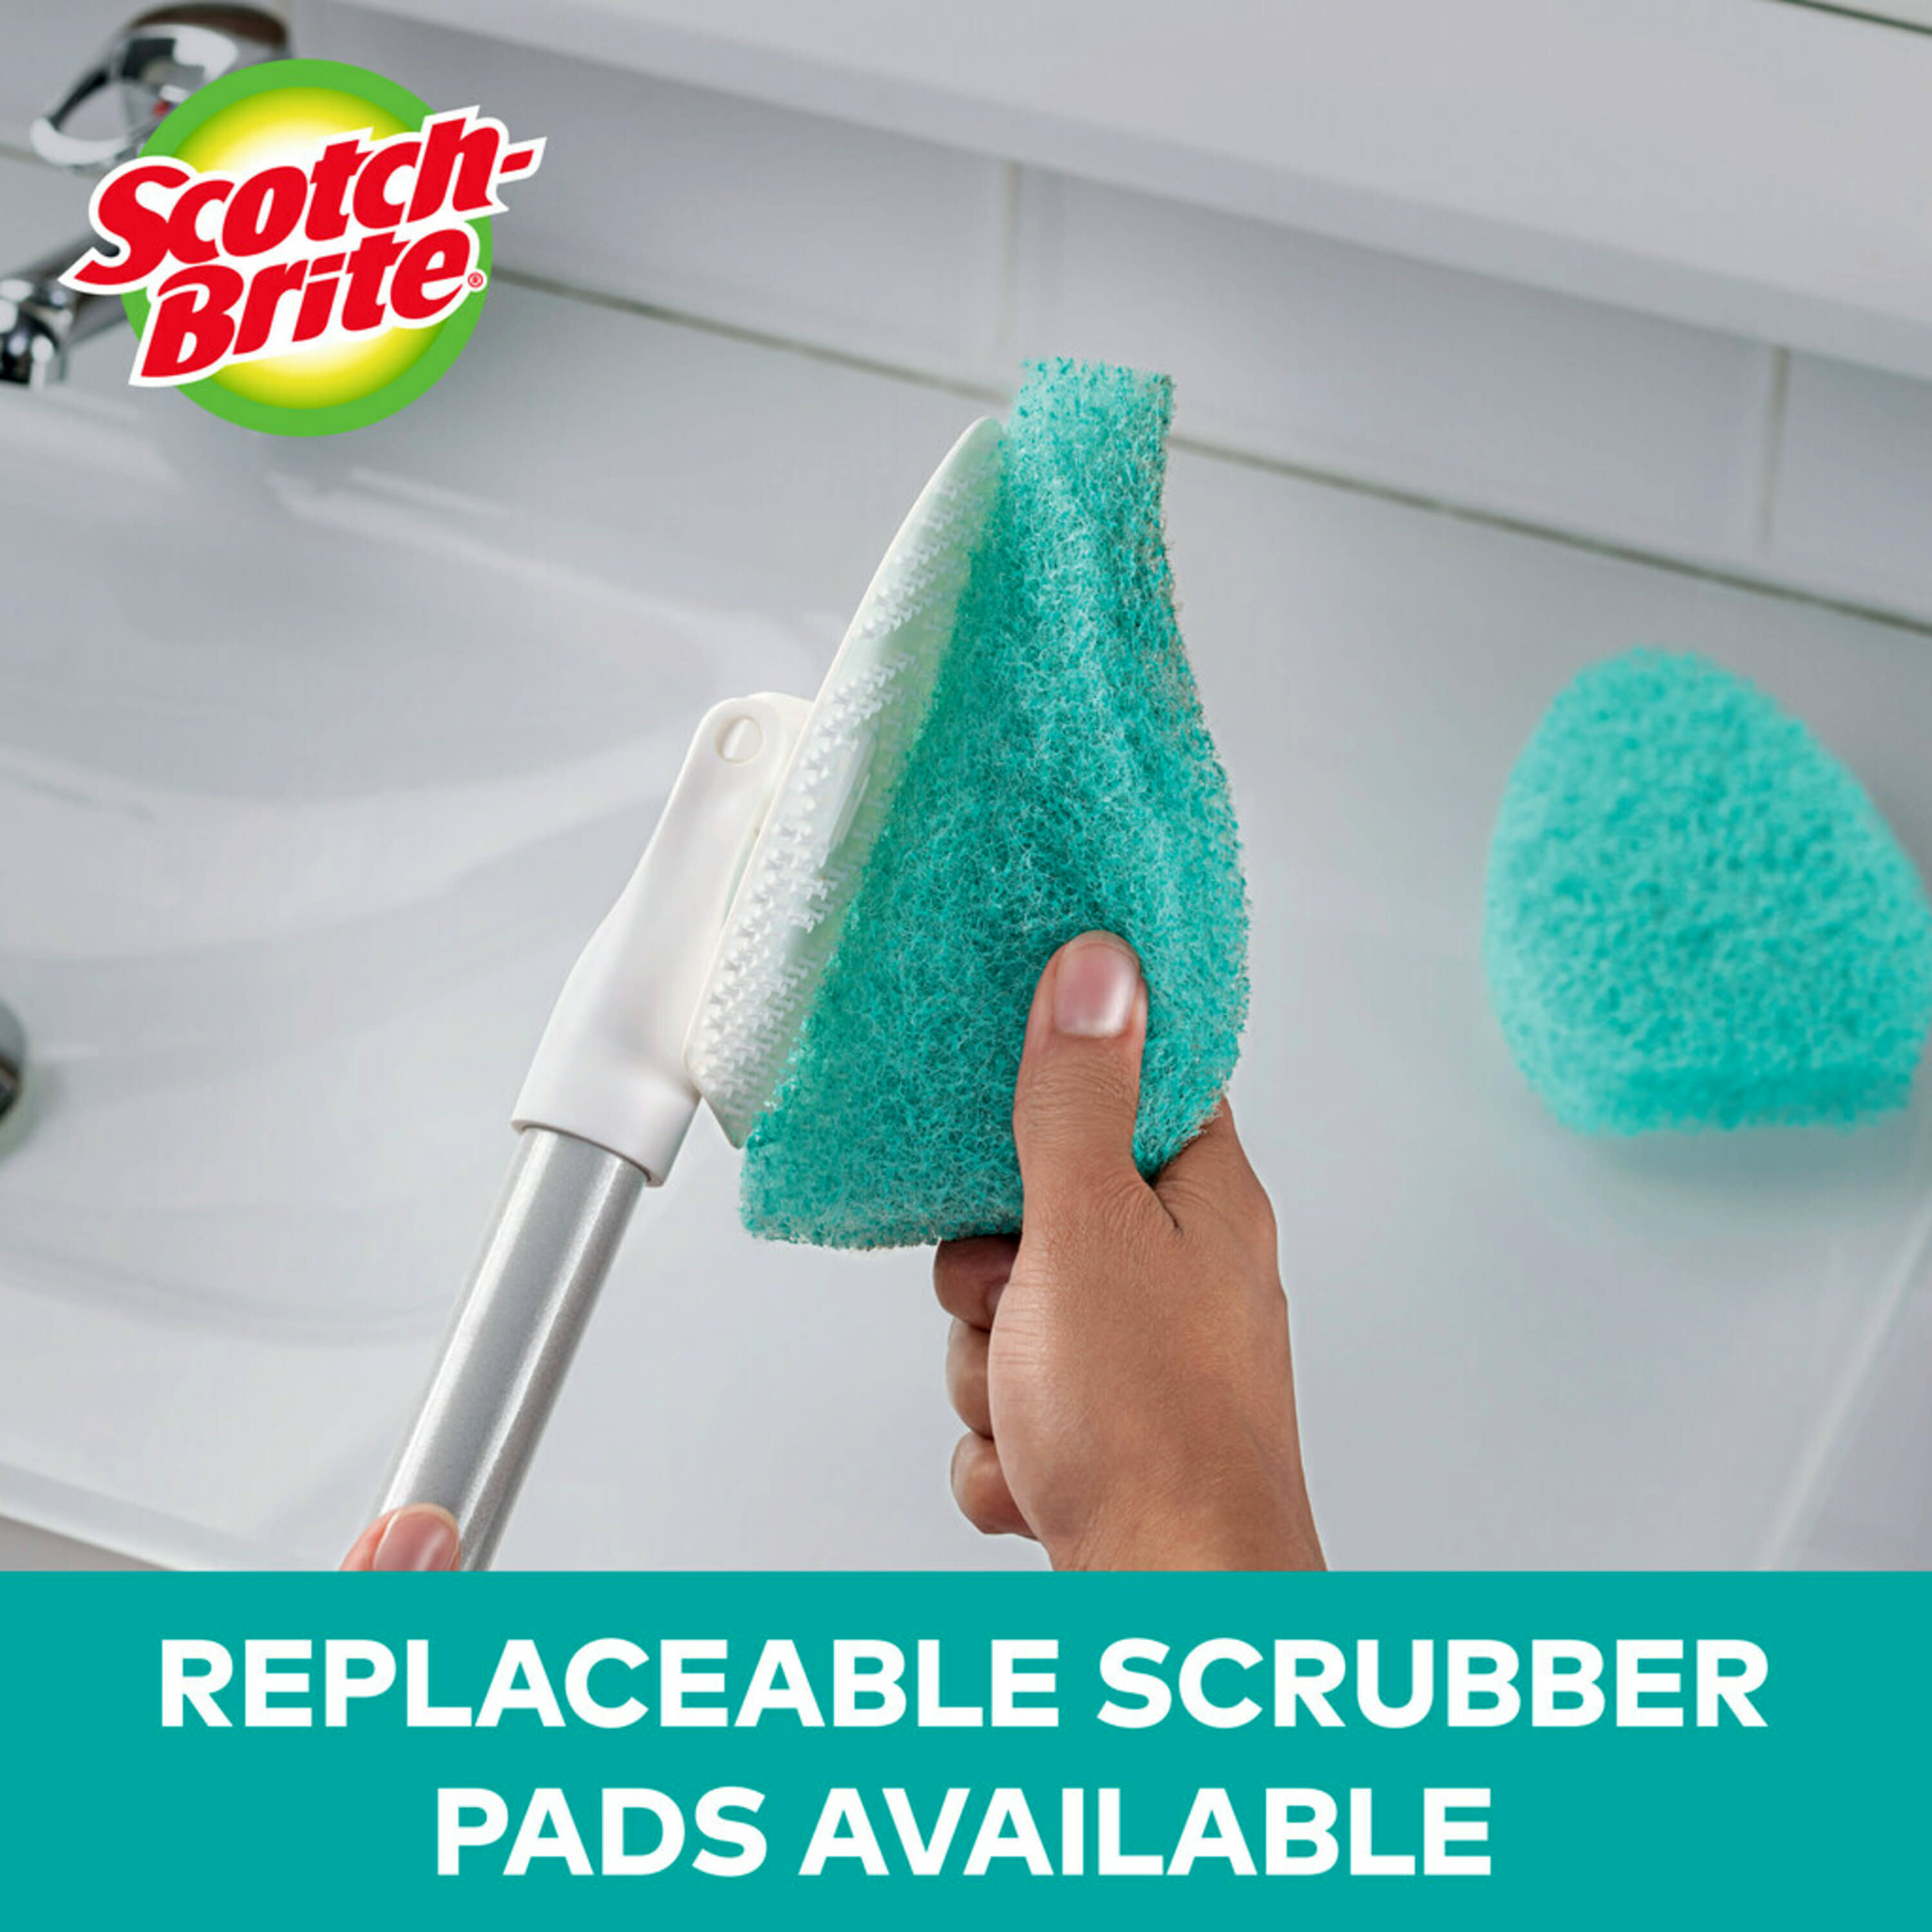 Shop Scotch-Brite Bathroom Cleaning Essentials: Grout/Scrub Brushes,  Squeegee, Toilet/Bathroom Cleaning Products at